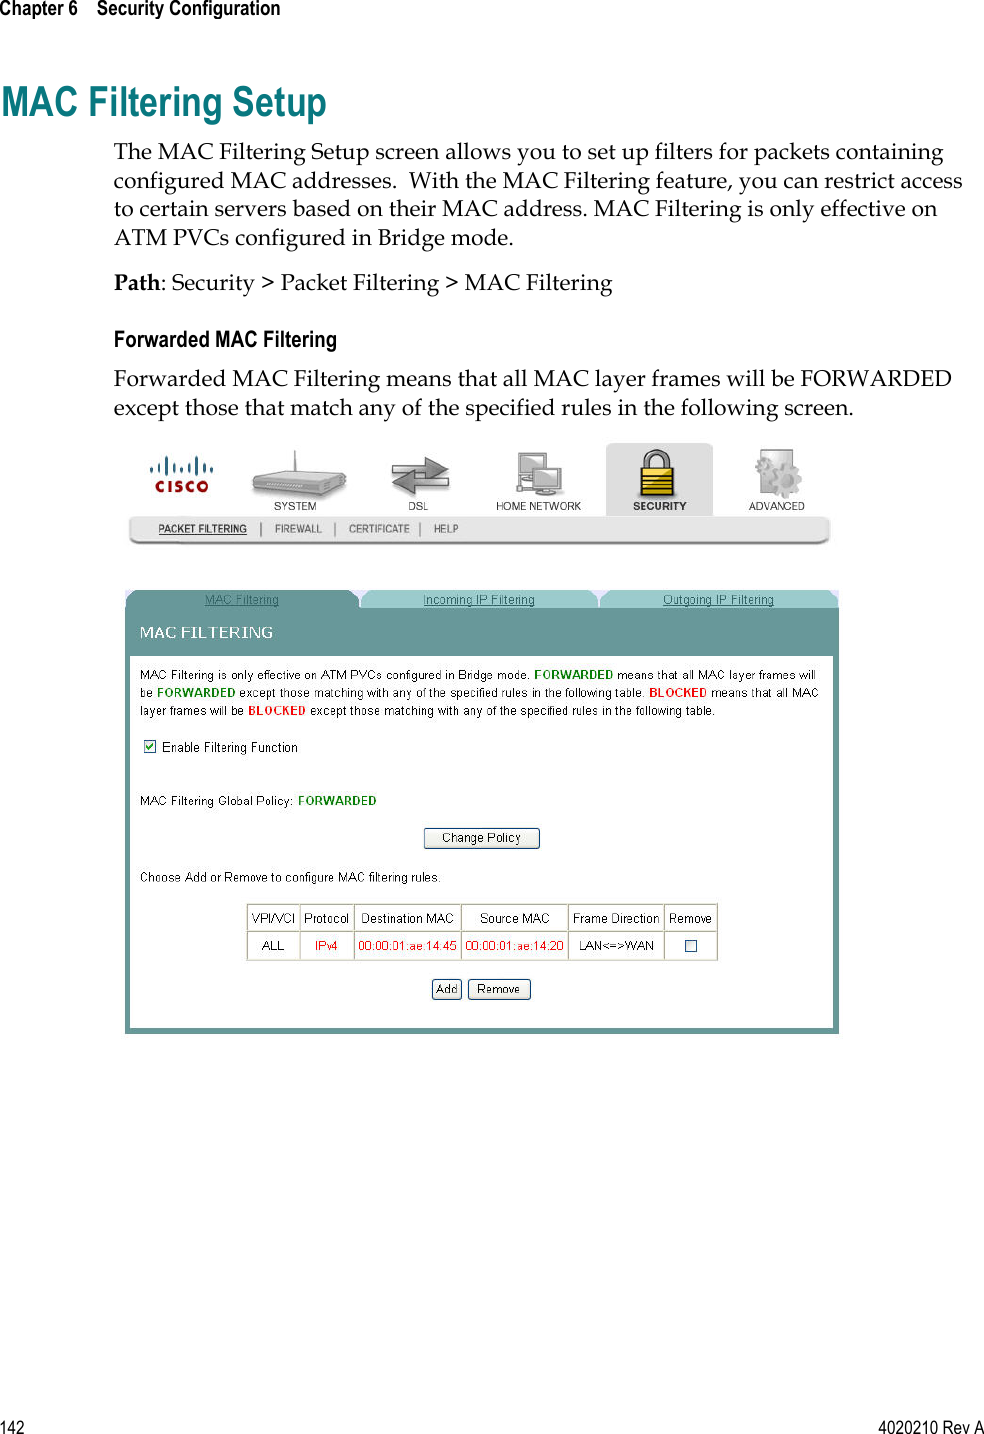  Chapter 6    Security Configuration   142  4020210 Rev A MAC Filtering Setup The MAC Filtering Setup screen allows you to set up filters for packets containing configured MAC addresses.  With the MAC Filtering feature, you can restrict access to certain servers based on their MAC address. MAC Filtering is only effective on ATM PVCs configured in Bridge mode. Path: Security &gt; Packet Filtering &gt; MAC Filtering Forwarded MAC Filtering Forwarded MAC Filtering means that all MAC layer frames will be FORWARDED except those that match any of the specified rules in the following screen.   